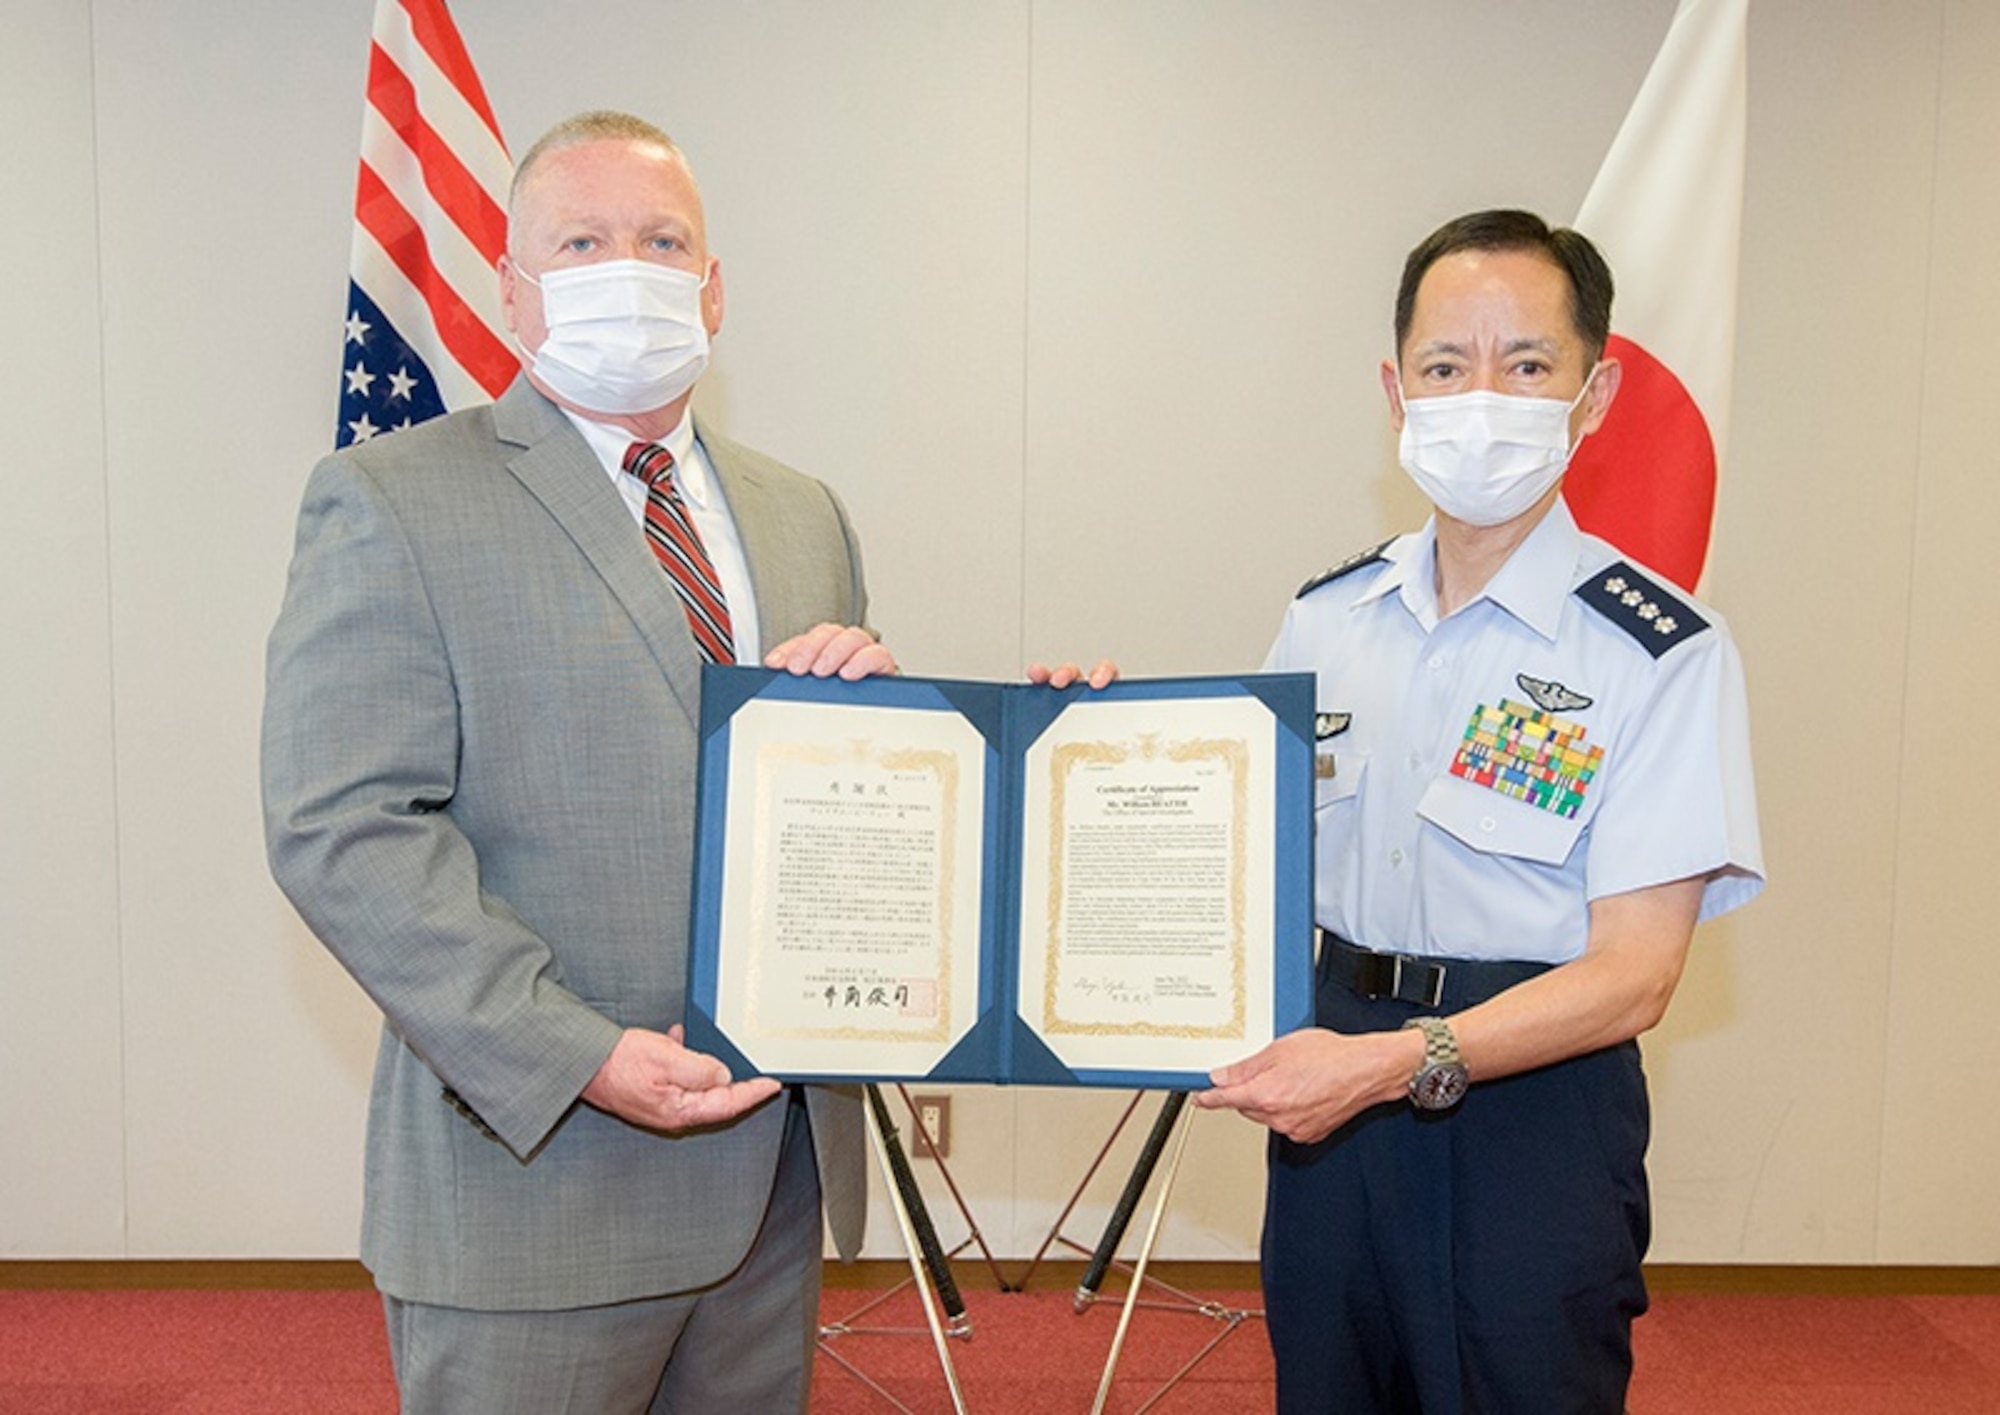 Special Agent Bill Beattie, OSI Field Investigations Region 6, Detachment 622, Tokyo, Japan, was formally recognized by General Shunji “Bert” Izutsu, Chief of Staff, Japanese Air Self Defense Force, during a presentation ceremony where he was awarded Japan’s Defense Cooperation Award (Second Class) July 2022. (Photo courtesy JASDF)